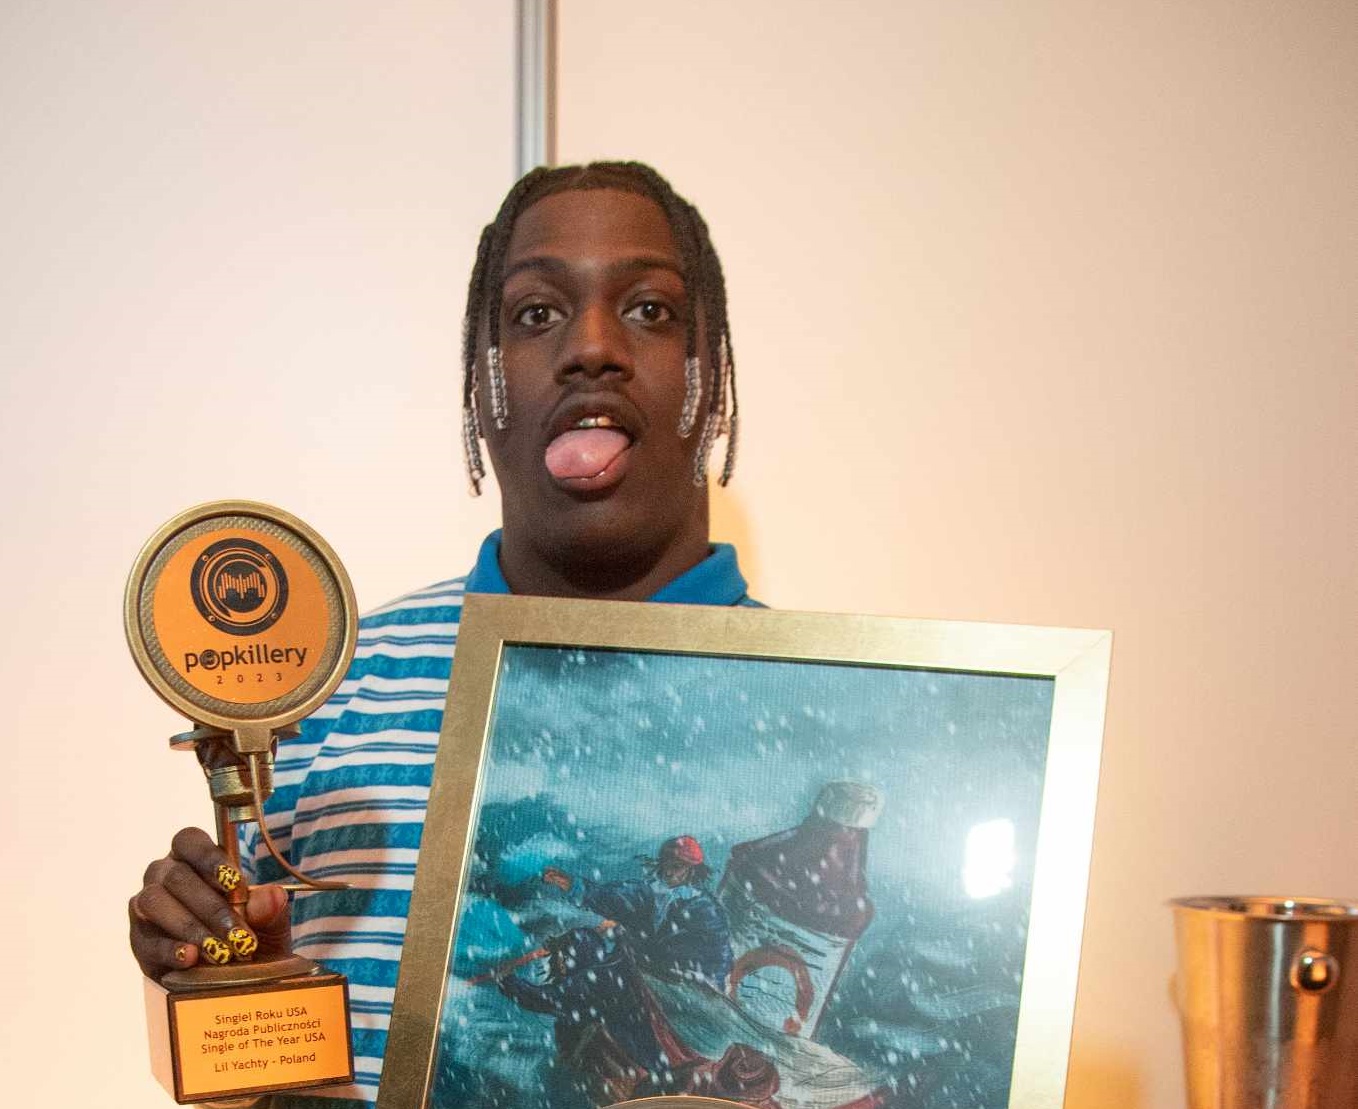 Lil Yachty Performs “Poland” 6x In A Row, Presented w/ Gold Plaque In Polish Sales